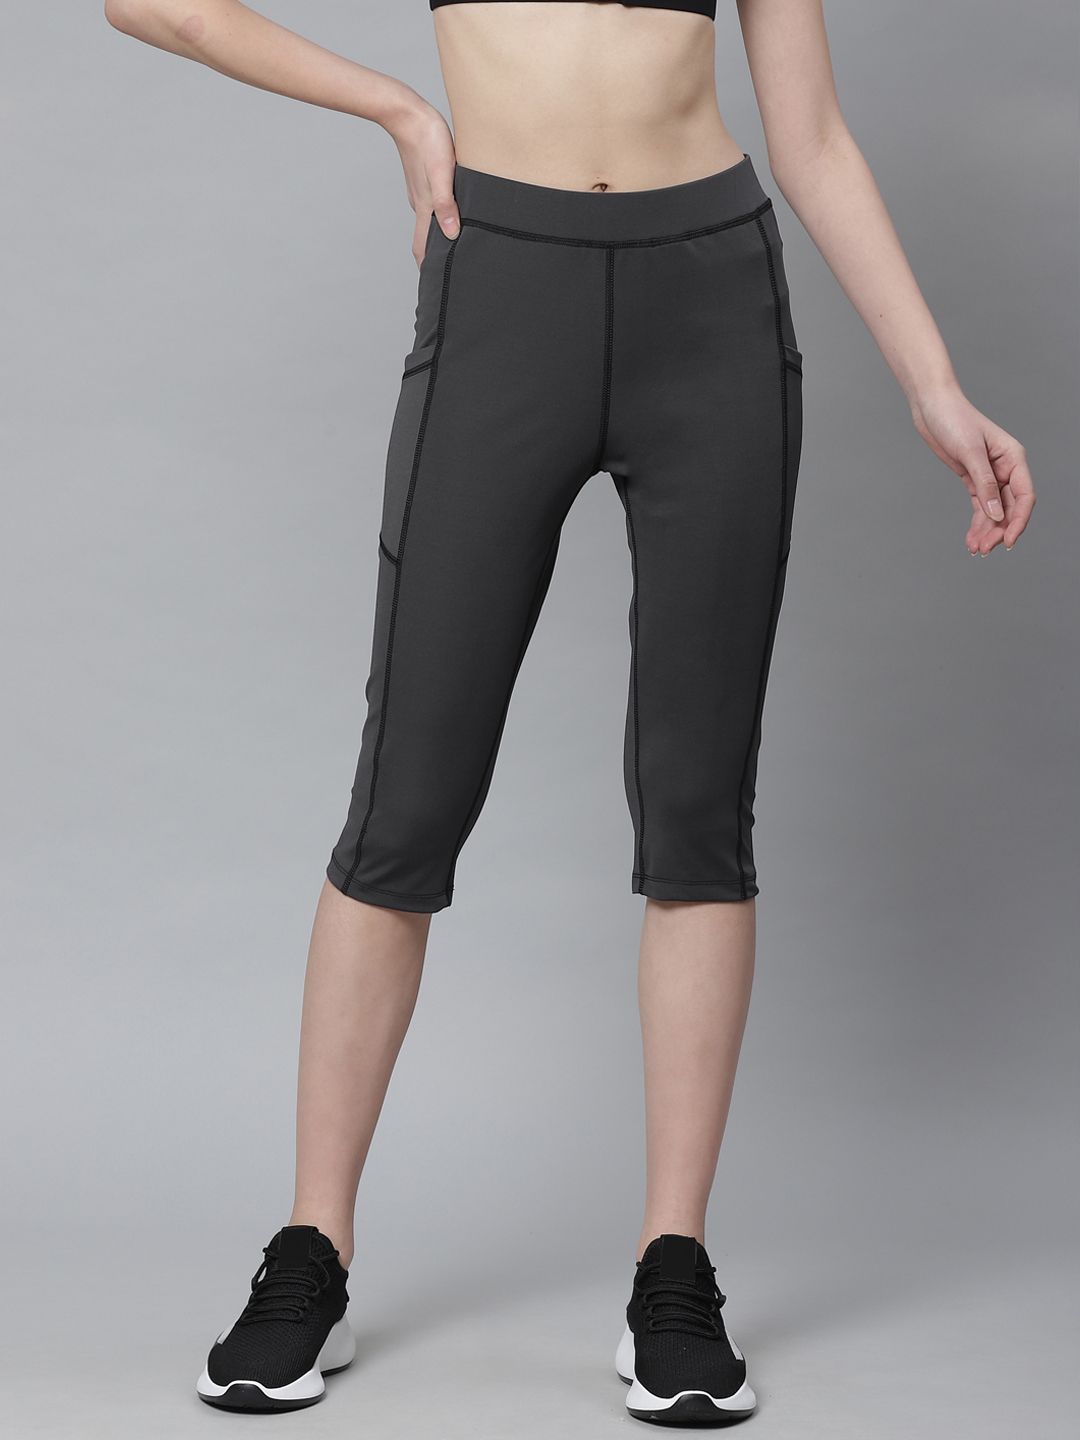 Chkokko Women Charcoal Grey Slim Fit Solid Three-Fourth Yoga Tights Price in India